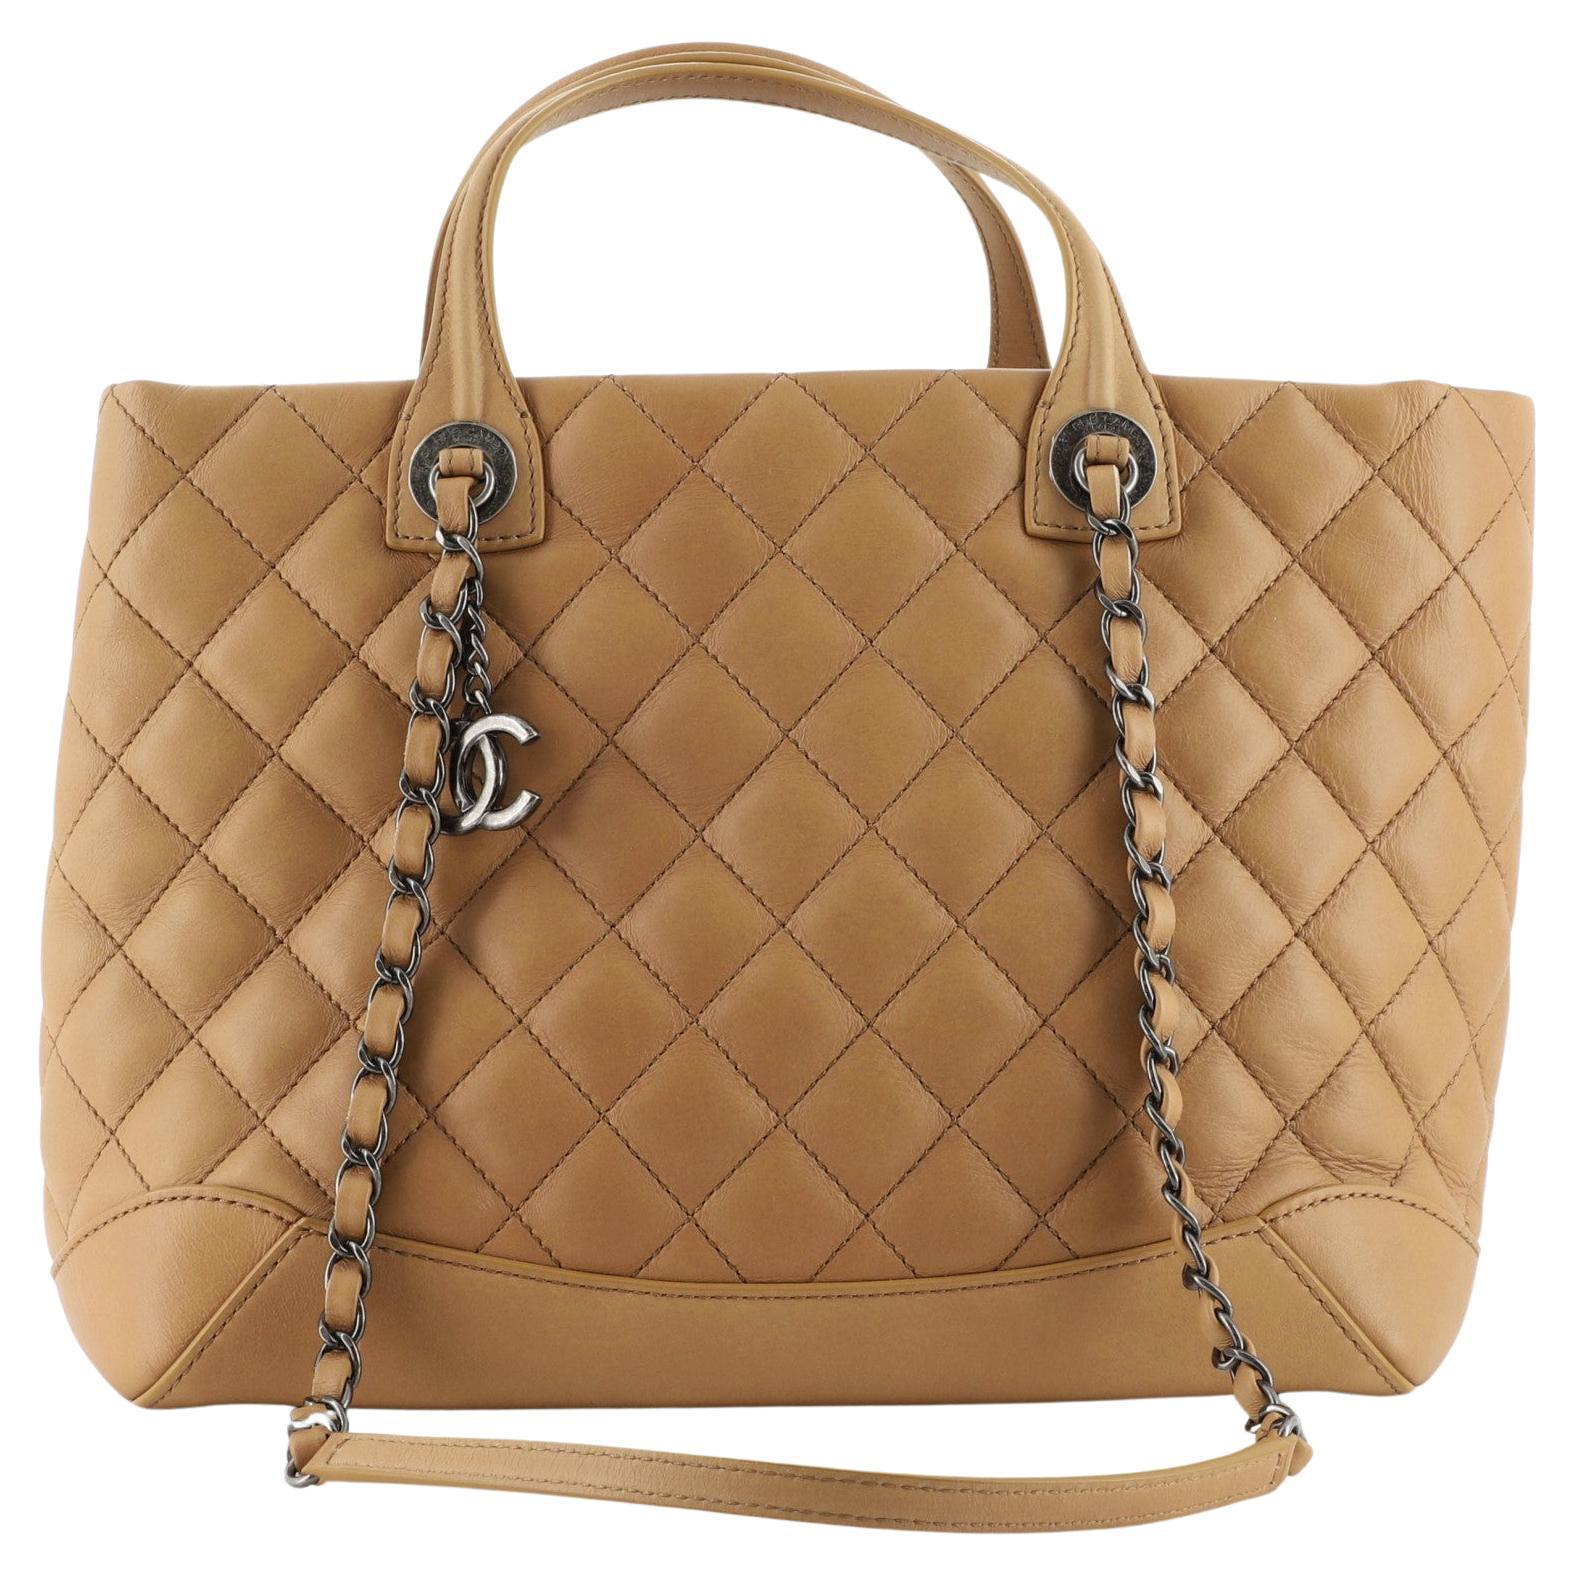 Chanel Easy Shopping Tote Quilted Calfskin Small